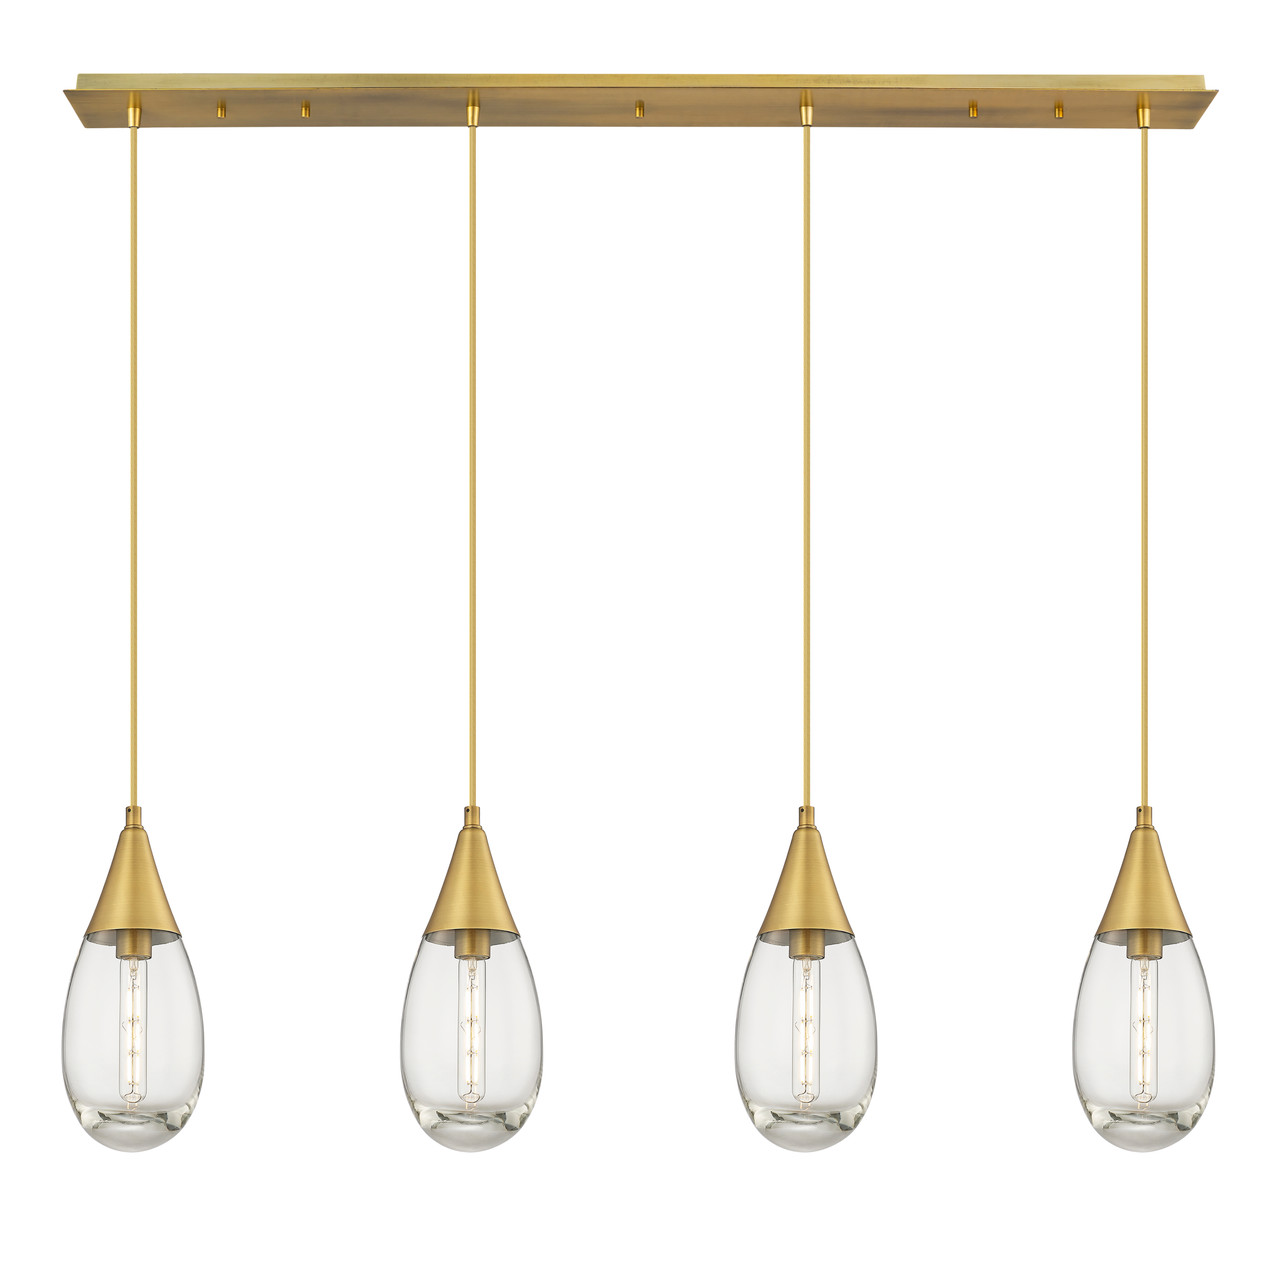 INNOVATIONS 124-450-1P-BB-G450-6CL Malone 8 Light 50 inch Linear Pendant Brushed Brass